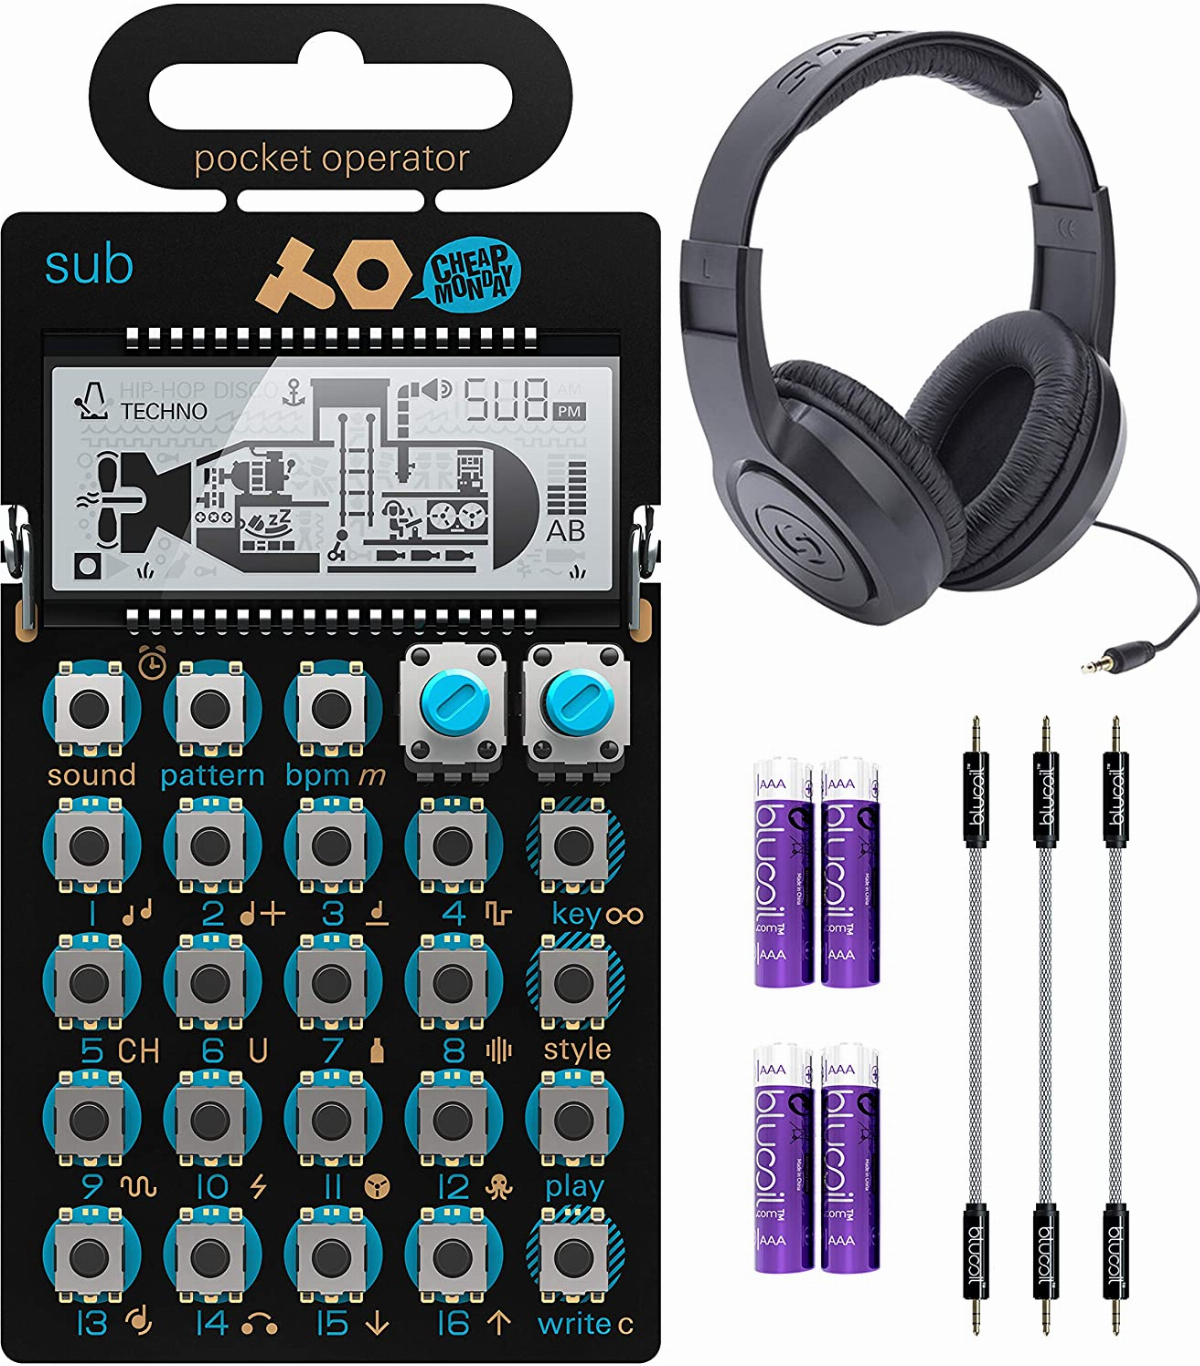 Teenage Engineering PO-14 Pocket Operator Sub Bass Synthesizer Bundle with Samson SR350 Over-Ear Closed-Back Headphones, Blucoil 3-Pack of 7